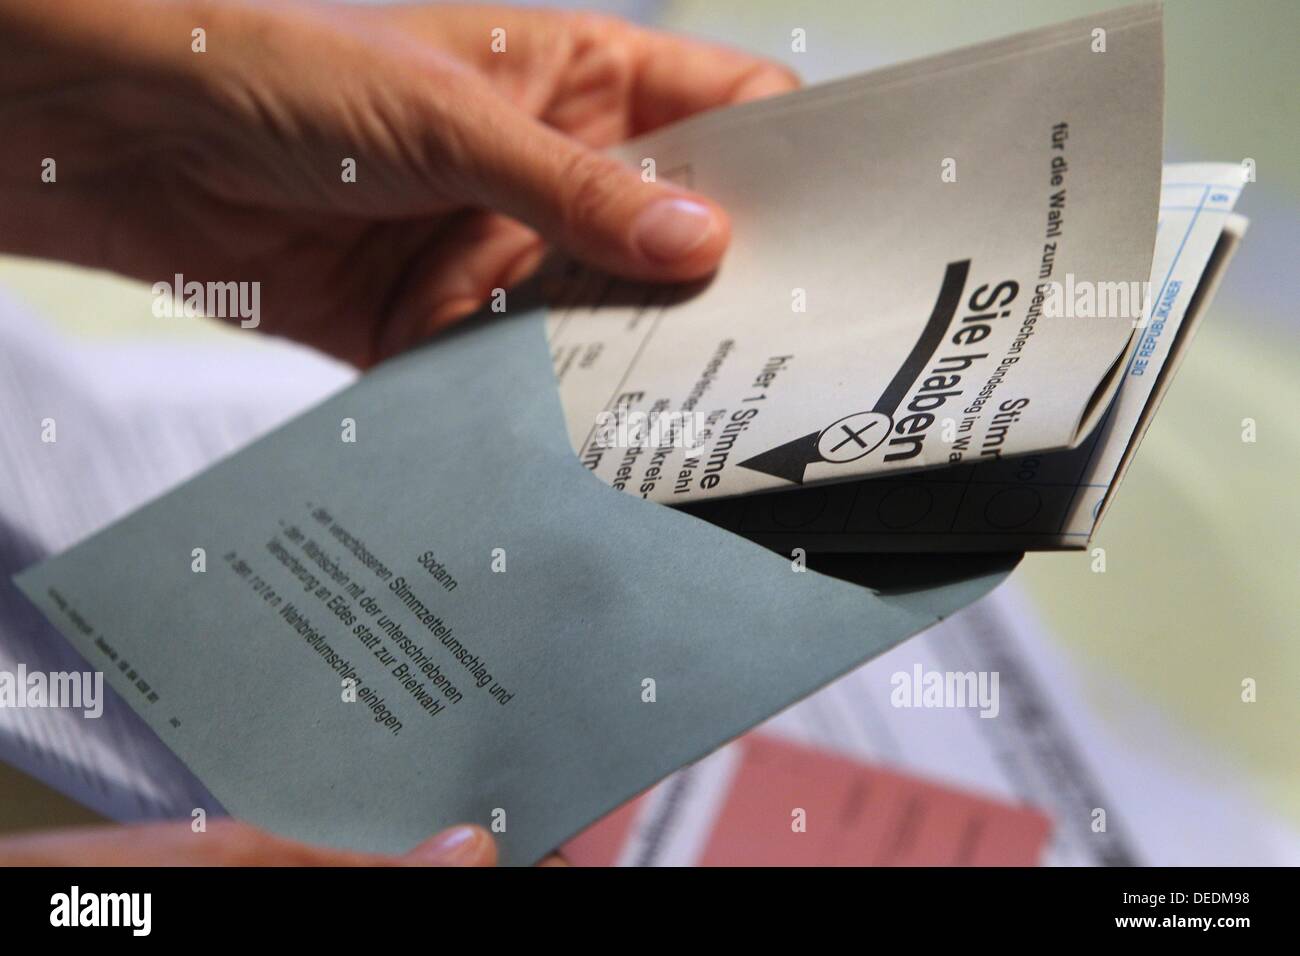 ILLUSTRATION - An illustrated picture shows a hand putting ballot papers for the German general elections 2013 in an envelope in Kaufbeuren, Germany, 17 September 2013. Photo: KARL-JOSEF HILDENBRAND Stock Photo